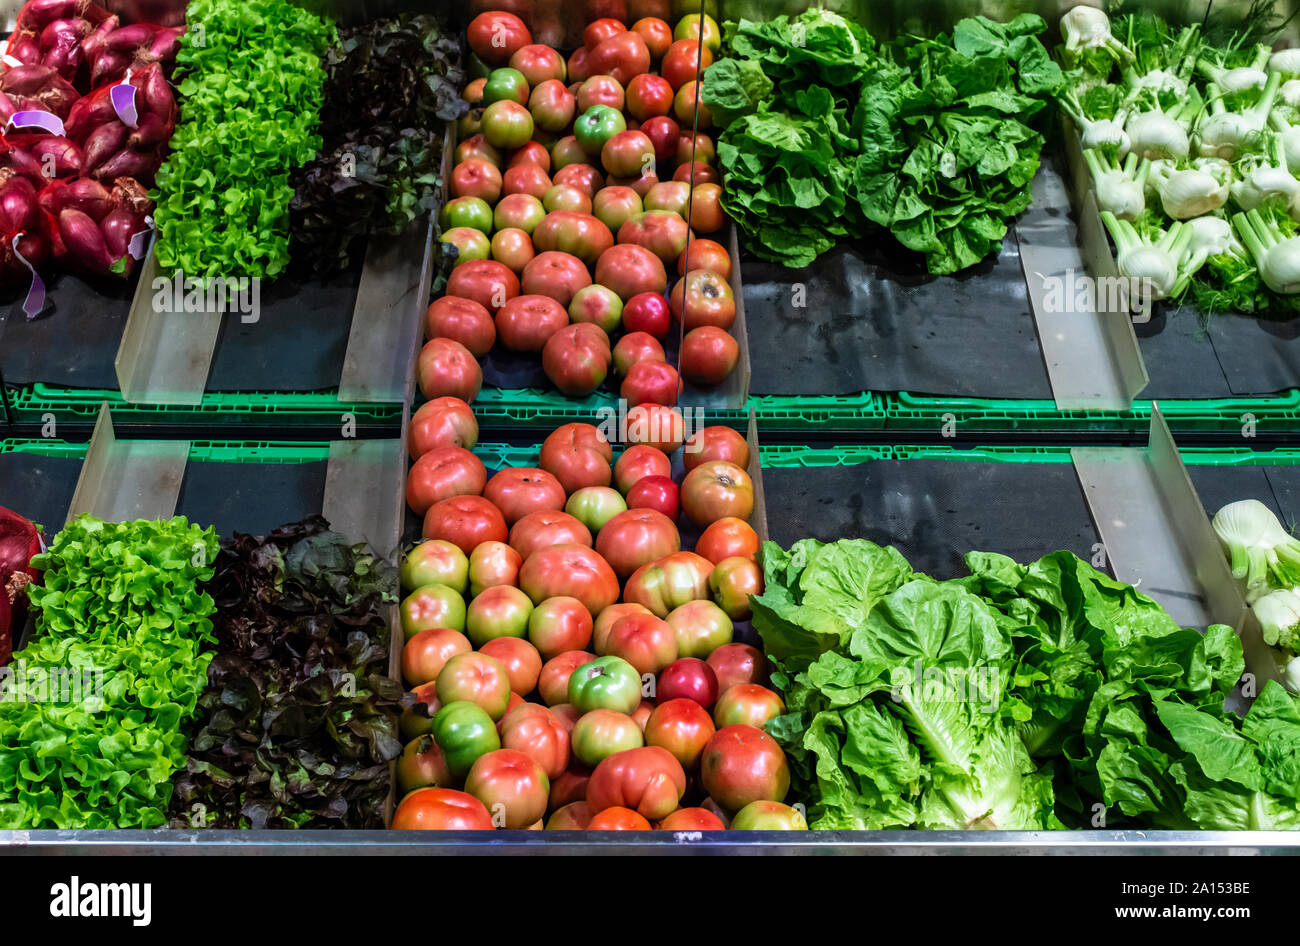 https://c8.alamy.com/comp/2A153BE/vegetables-on-shelf-in-supermarket-tomatoes-lettuce-and-fennel-2A153BE.jpg